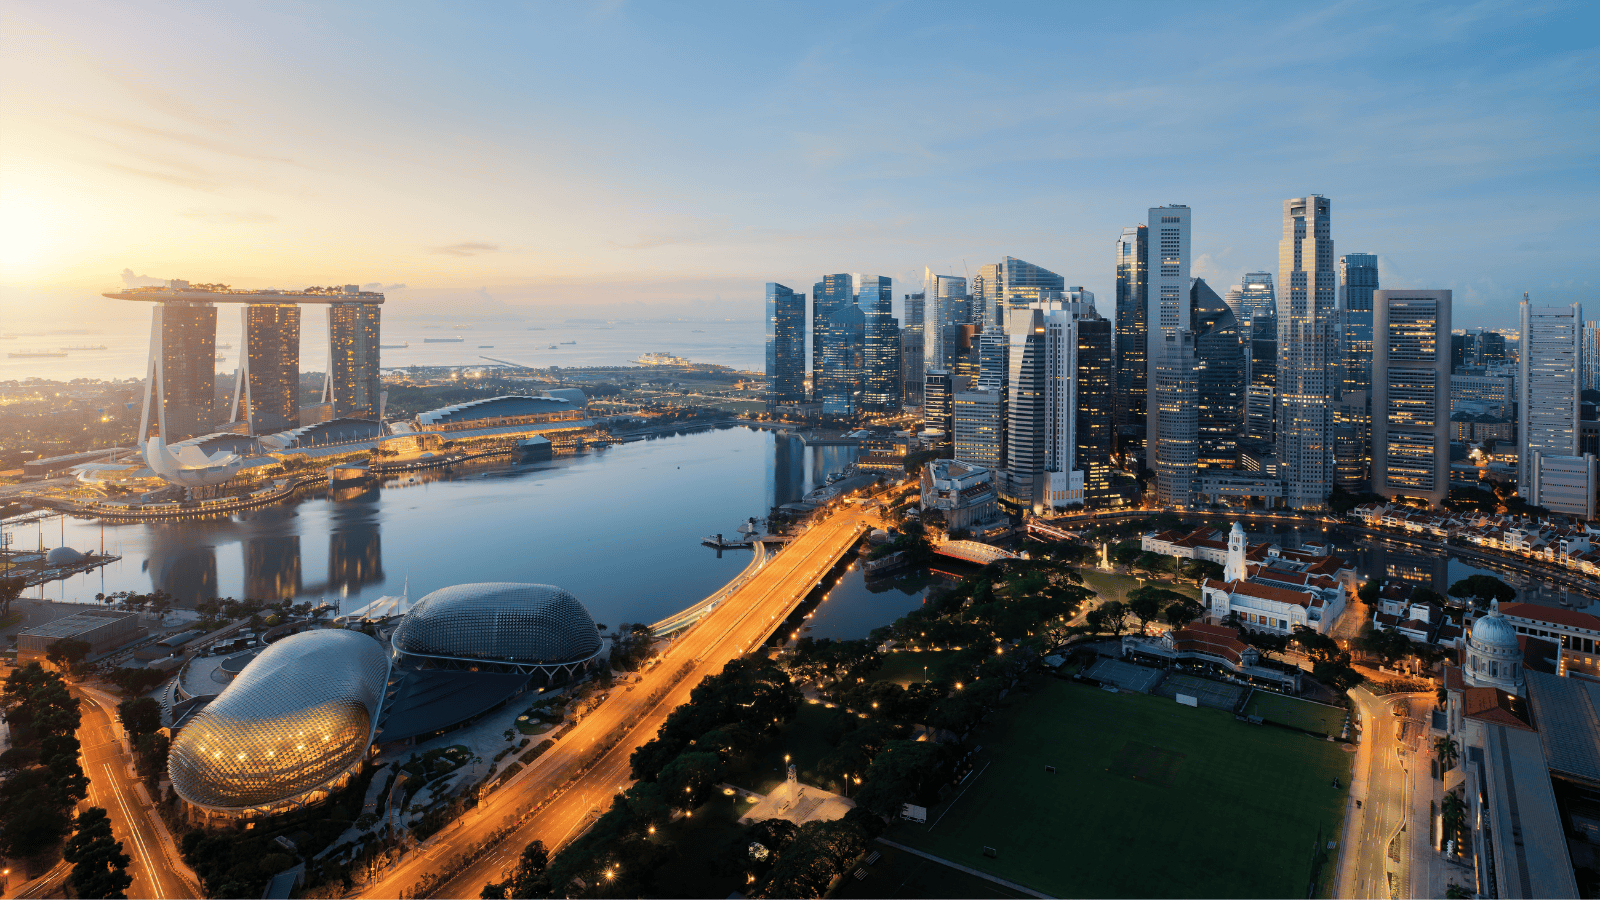 <p>Singapore is a city-state that appeals to travelers seeking an upscale vacation. Its robust economy and classy lifestyle closely resemble those of Dubai.</p><p>This splurge-worthy Southeast Asian region has renowned shopping, dining, and man-made wonders. You’ll never run out of sights and activities to occupy your time in Singapore.</p>